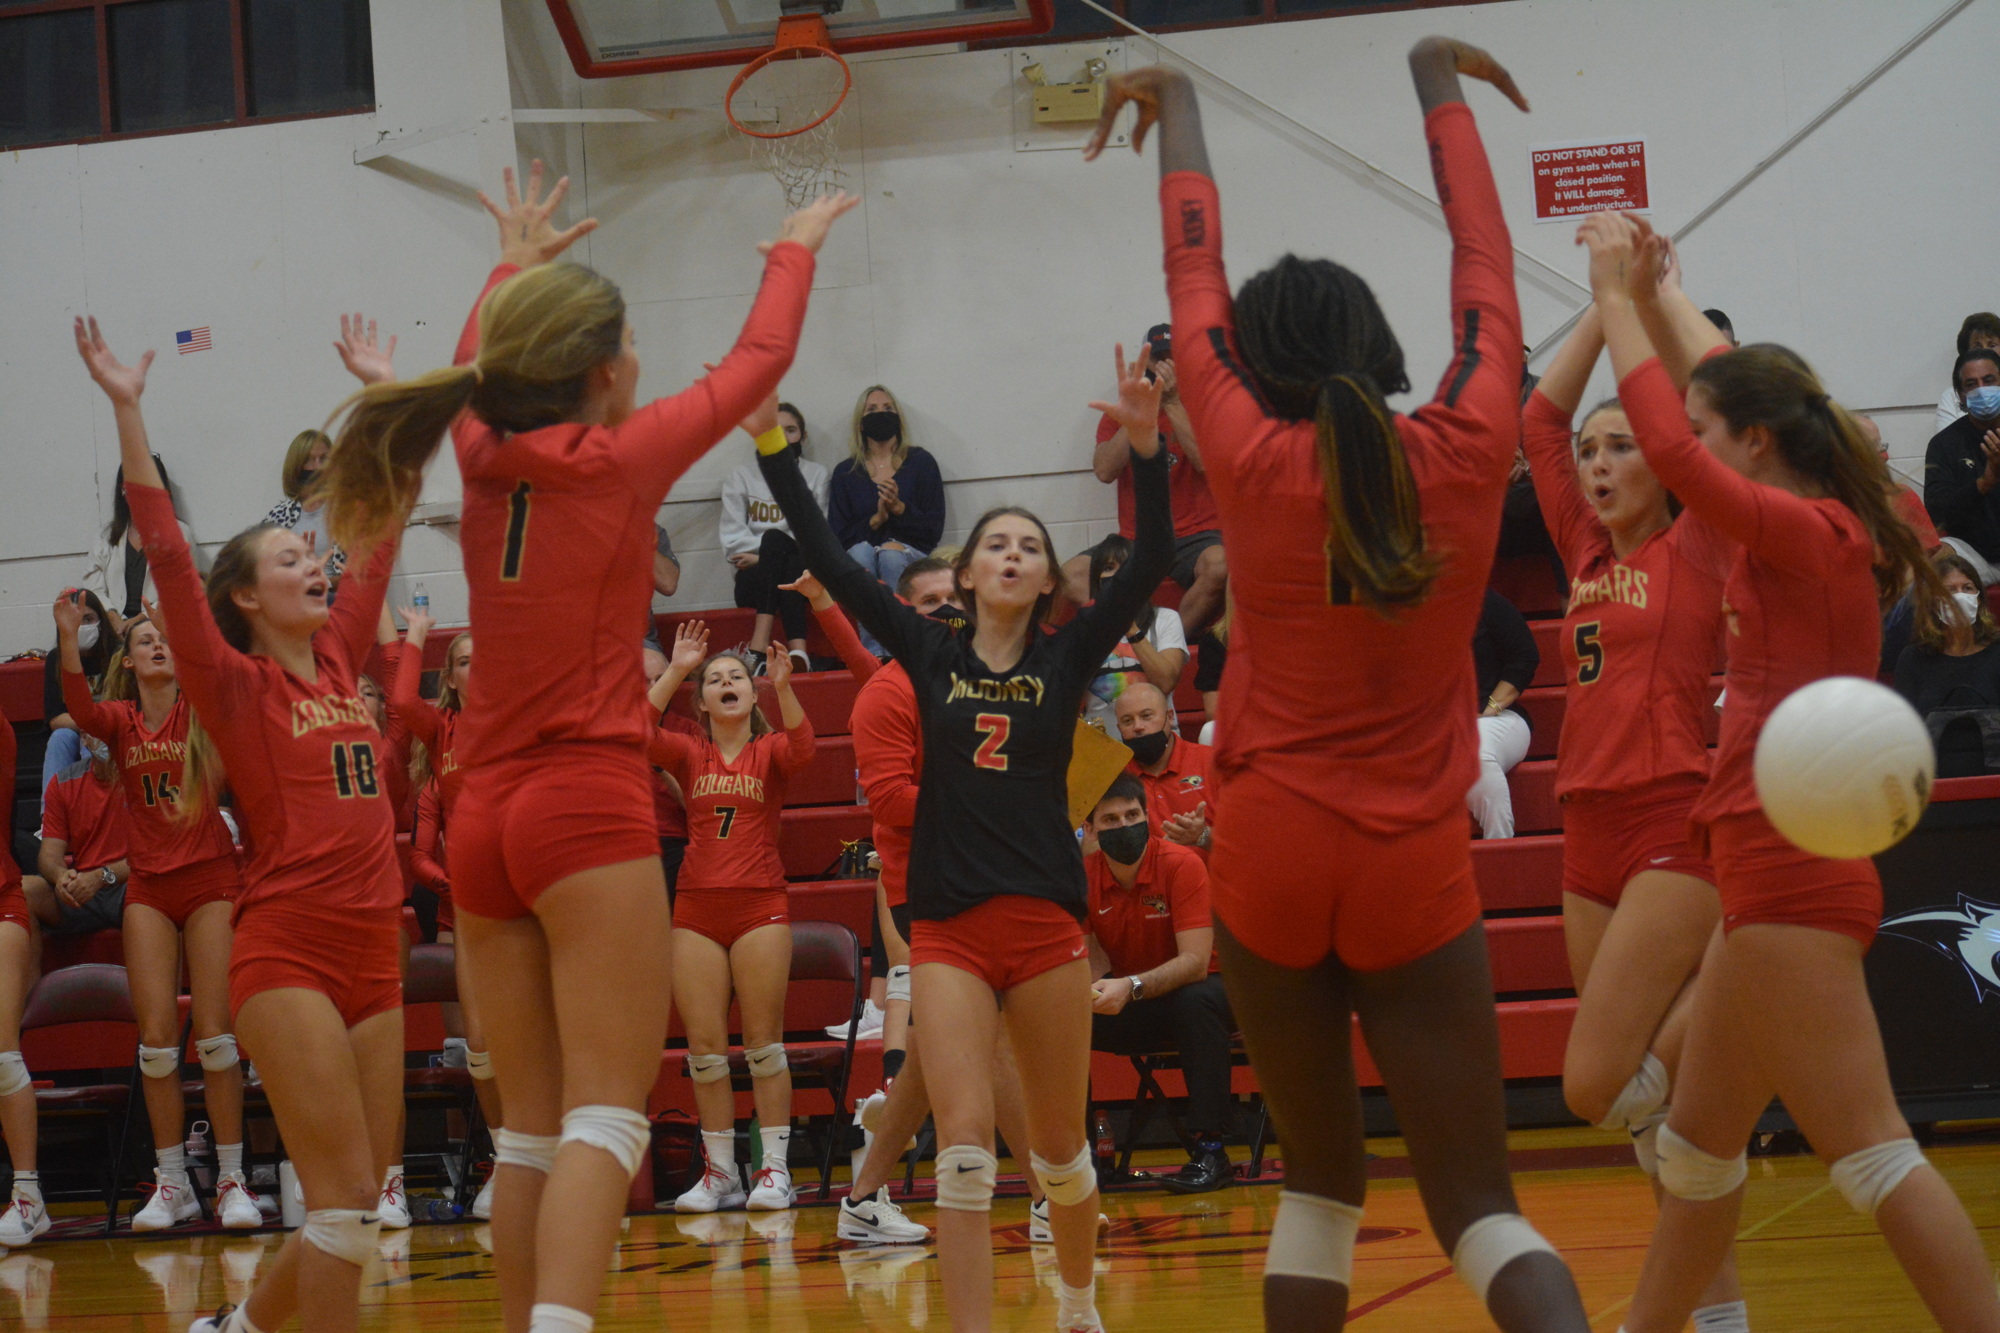 8. Cardinal Mooney volleyball defeated the Community School of Naples in straight sets to advance to the regional finals.